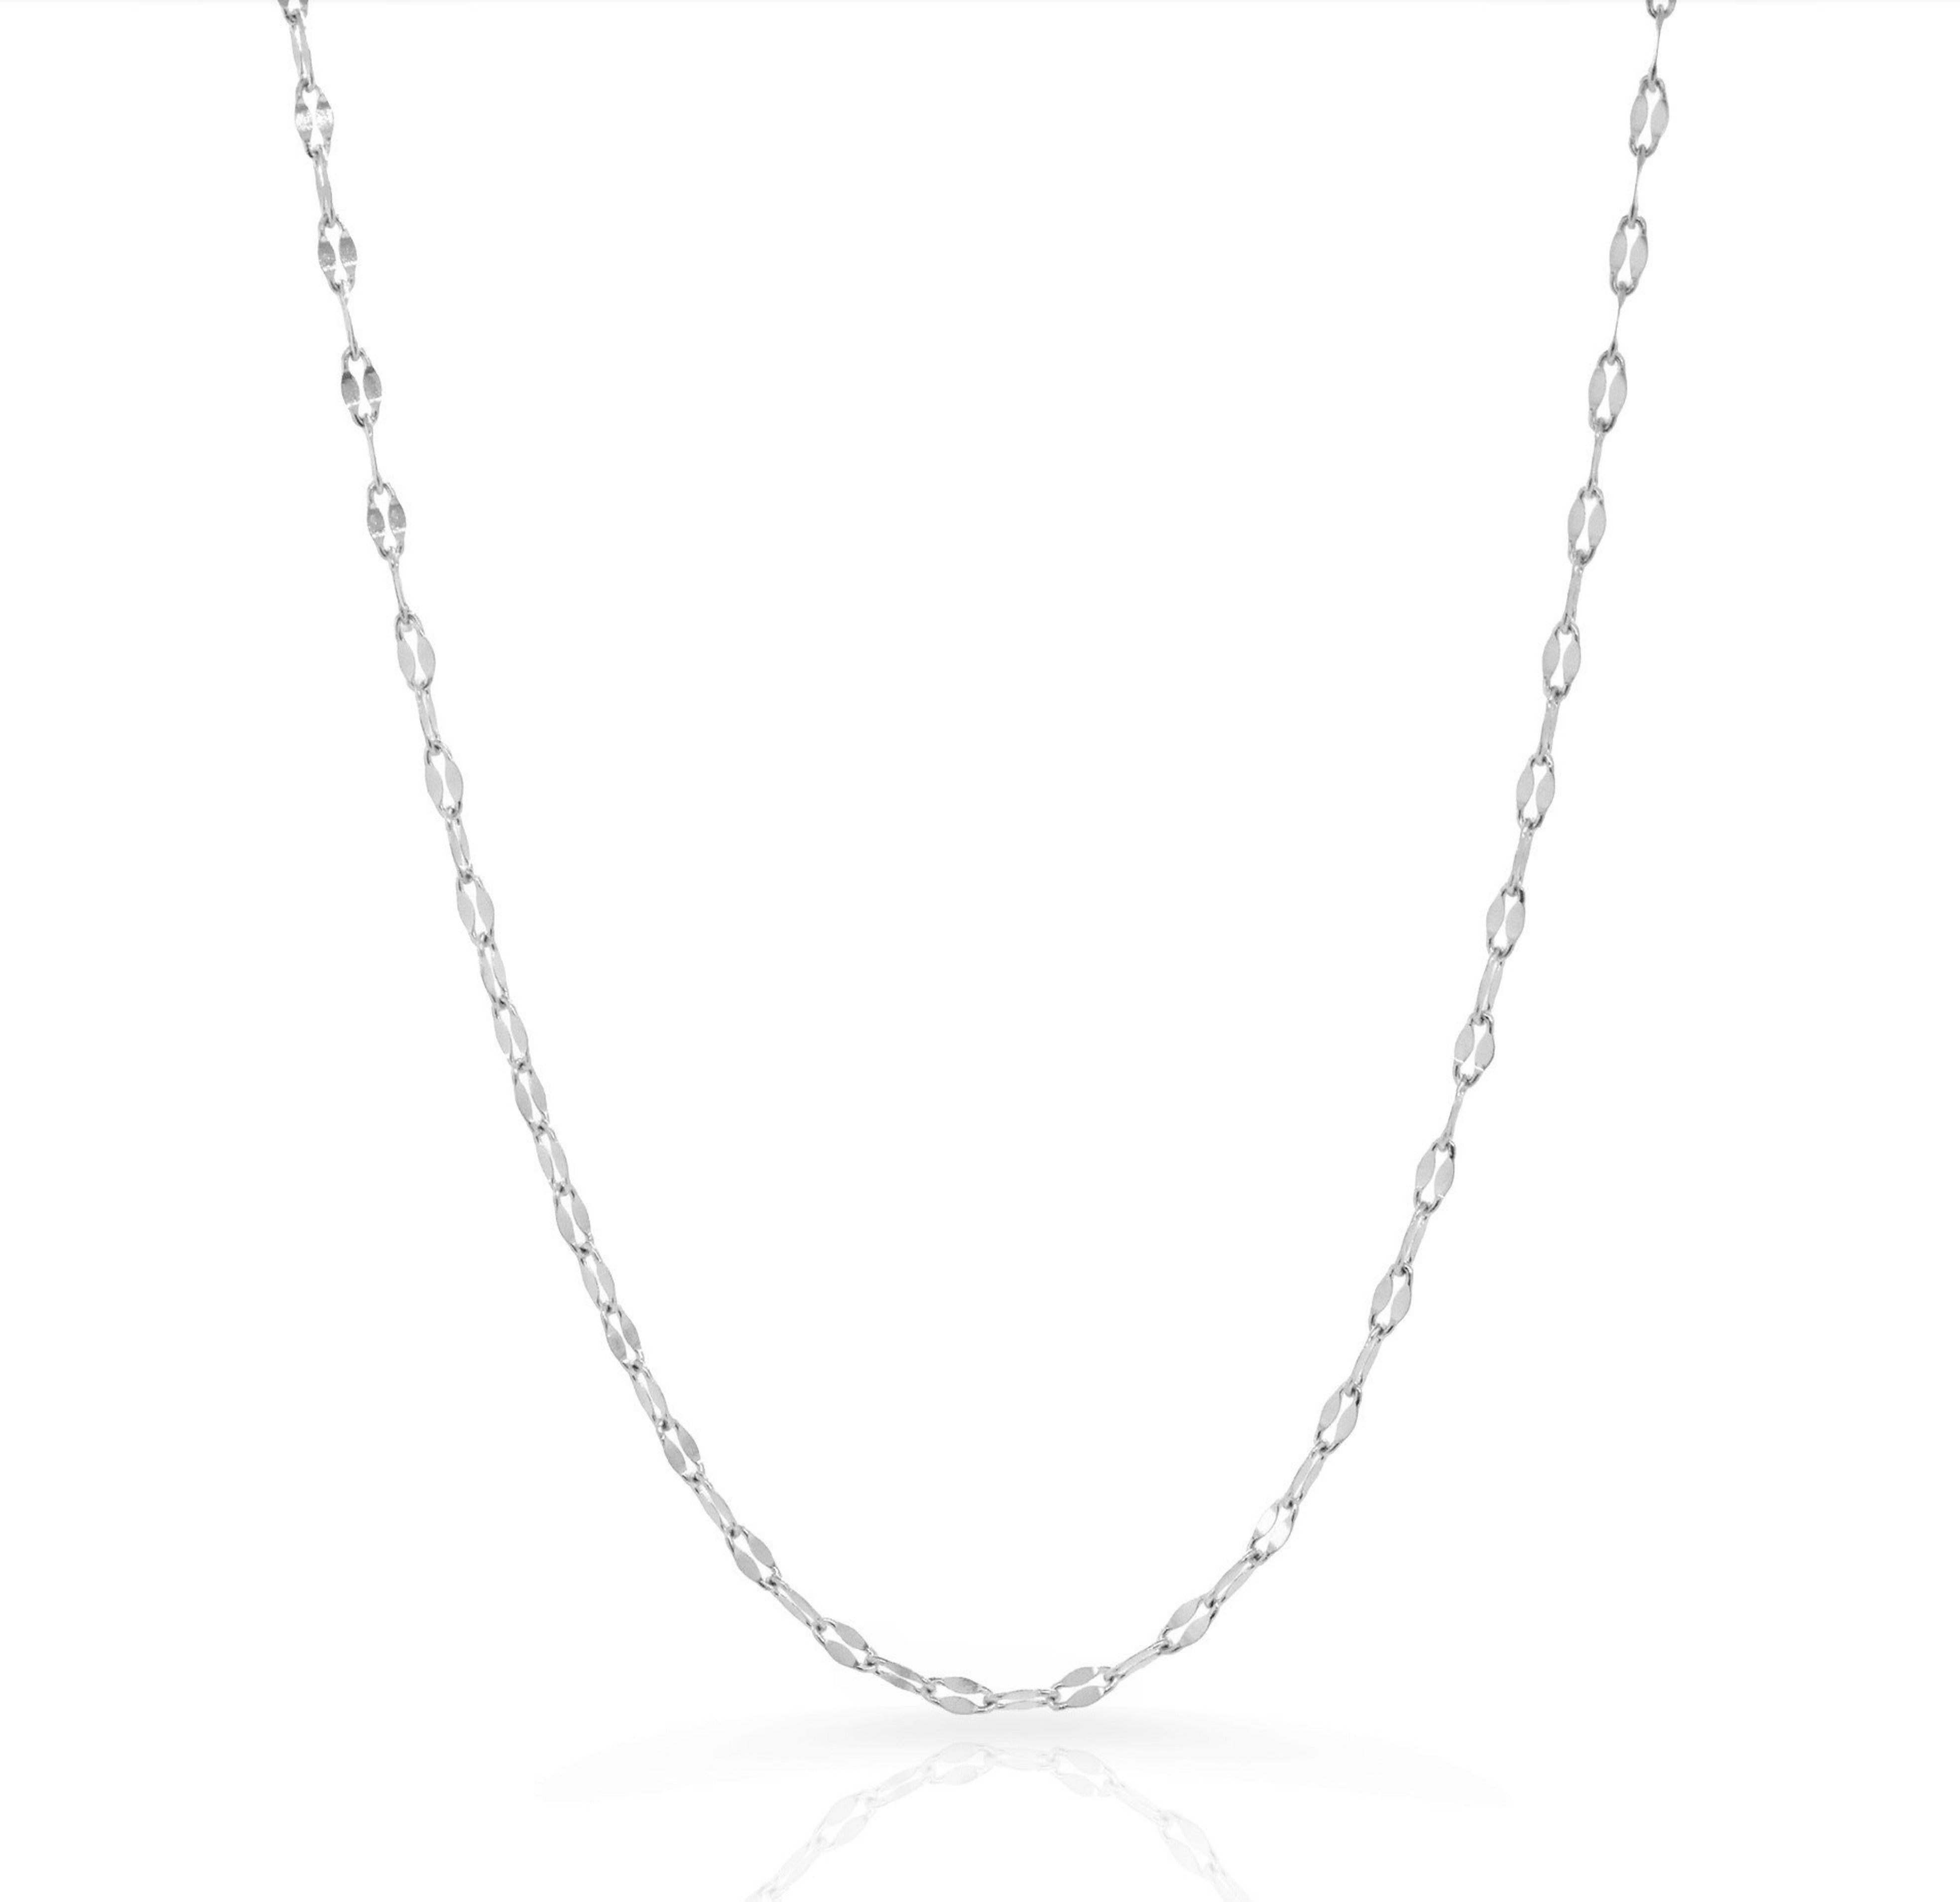 ELSIE SILVER DAINTY LACE CHAIN NECKLACE SAMPLE